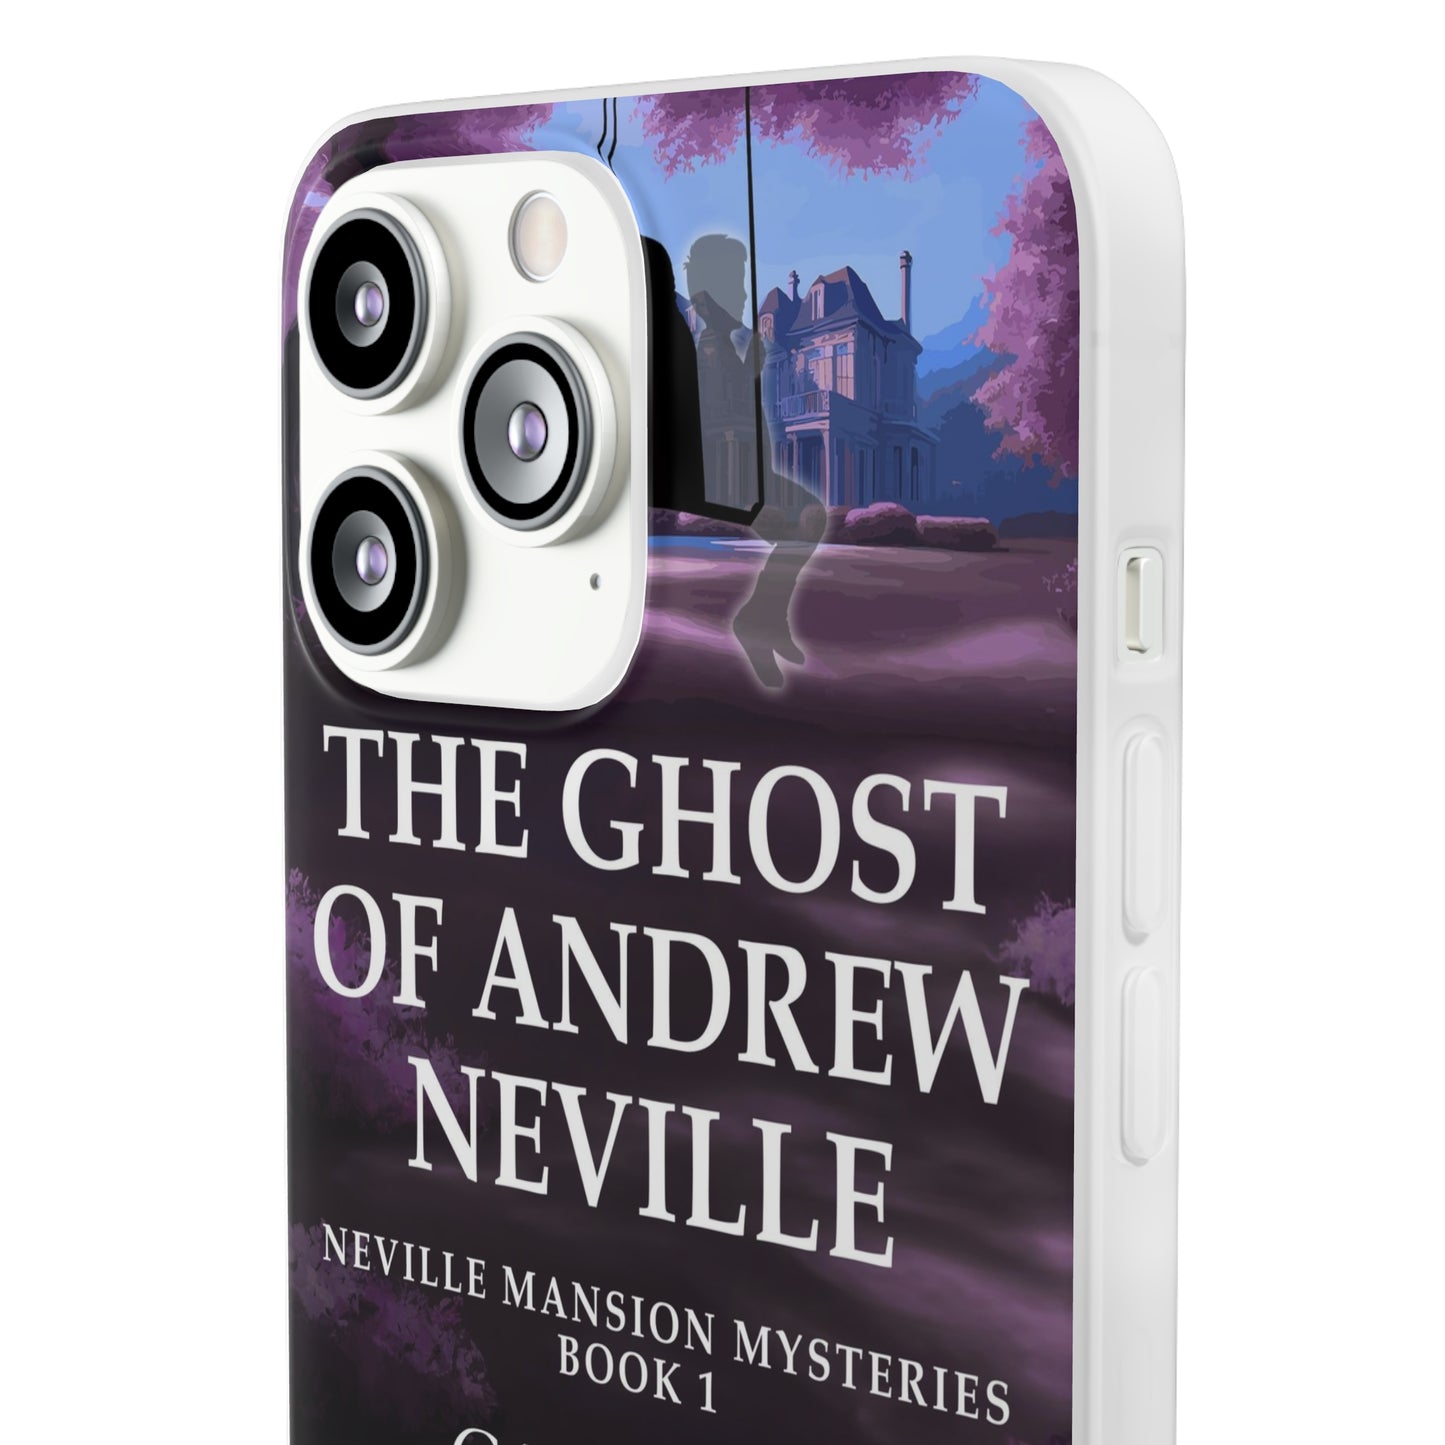 The Ghost of Andrew Neville - Flexible Phone Case